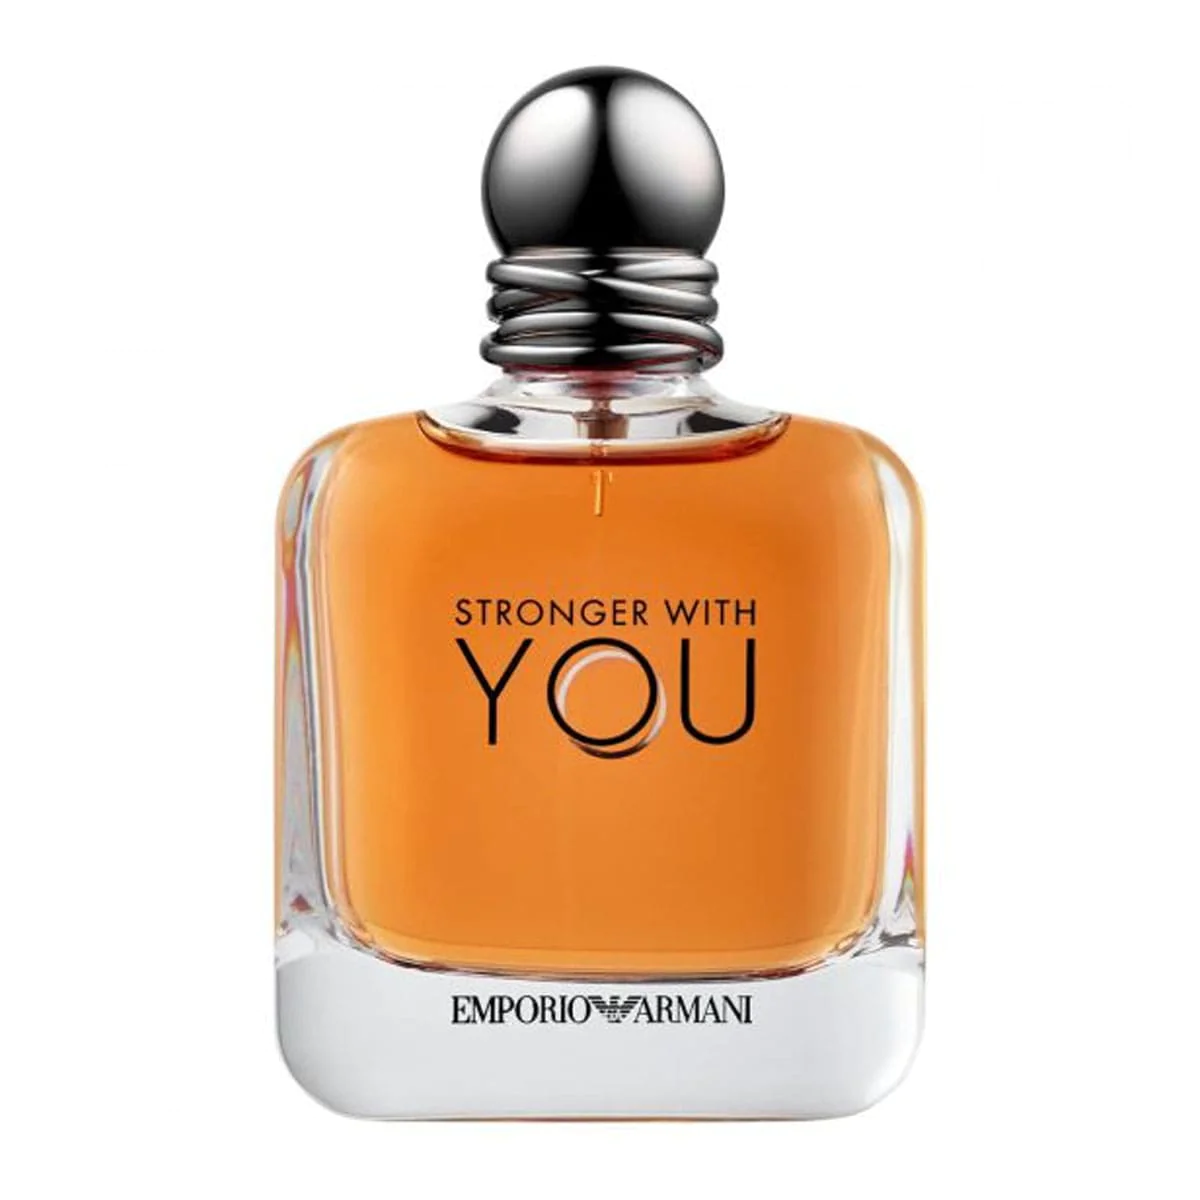 Emporio Armani Stronger With You EDT – 100ML – The Perfume HQ, Ghana